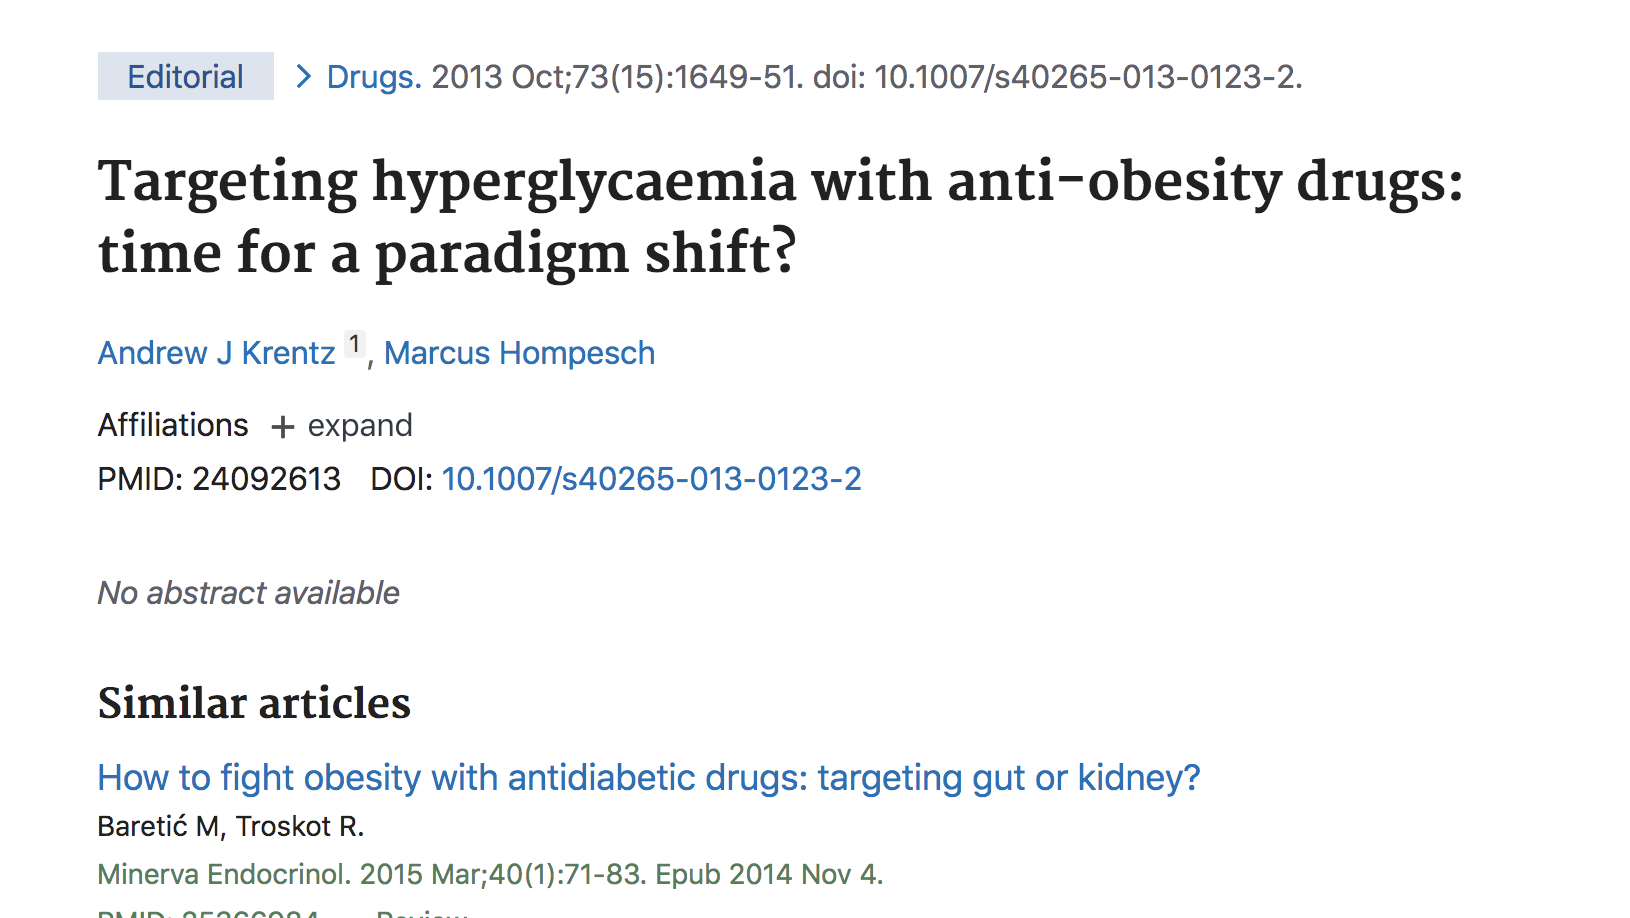 image of Targeting hyperglycaemia with anti-obesity drugs: time for a paradigm shift